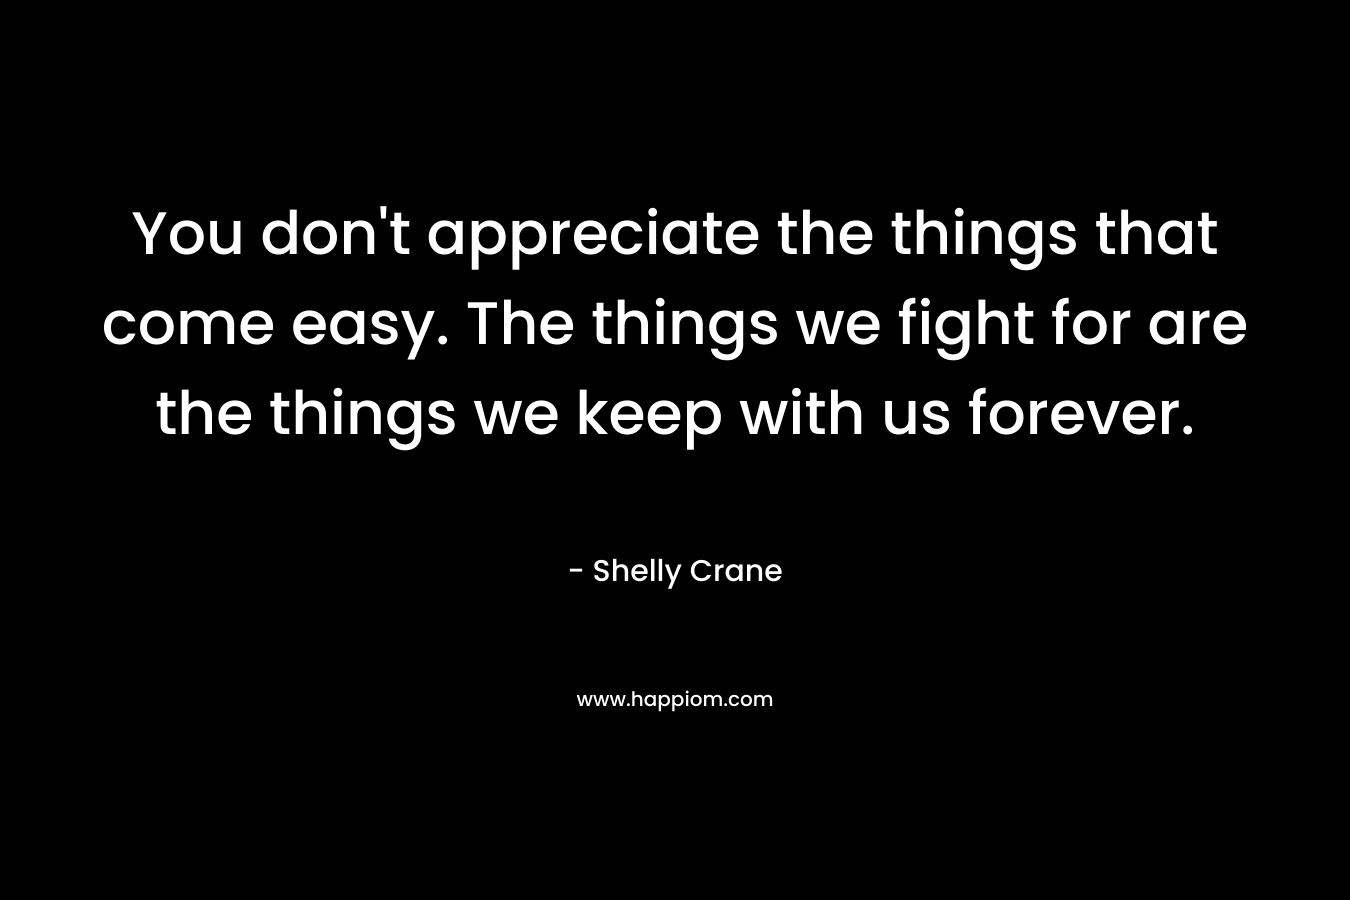 You don’t appreciate the things that come easy. The things we fight for are the things we keep with us forever. – Shelly Crane